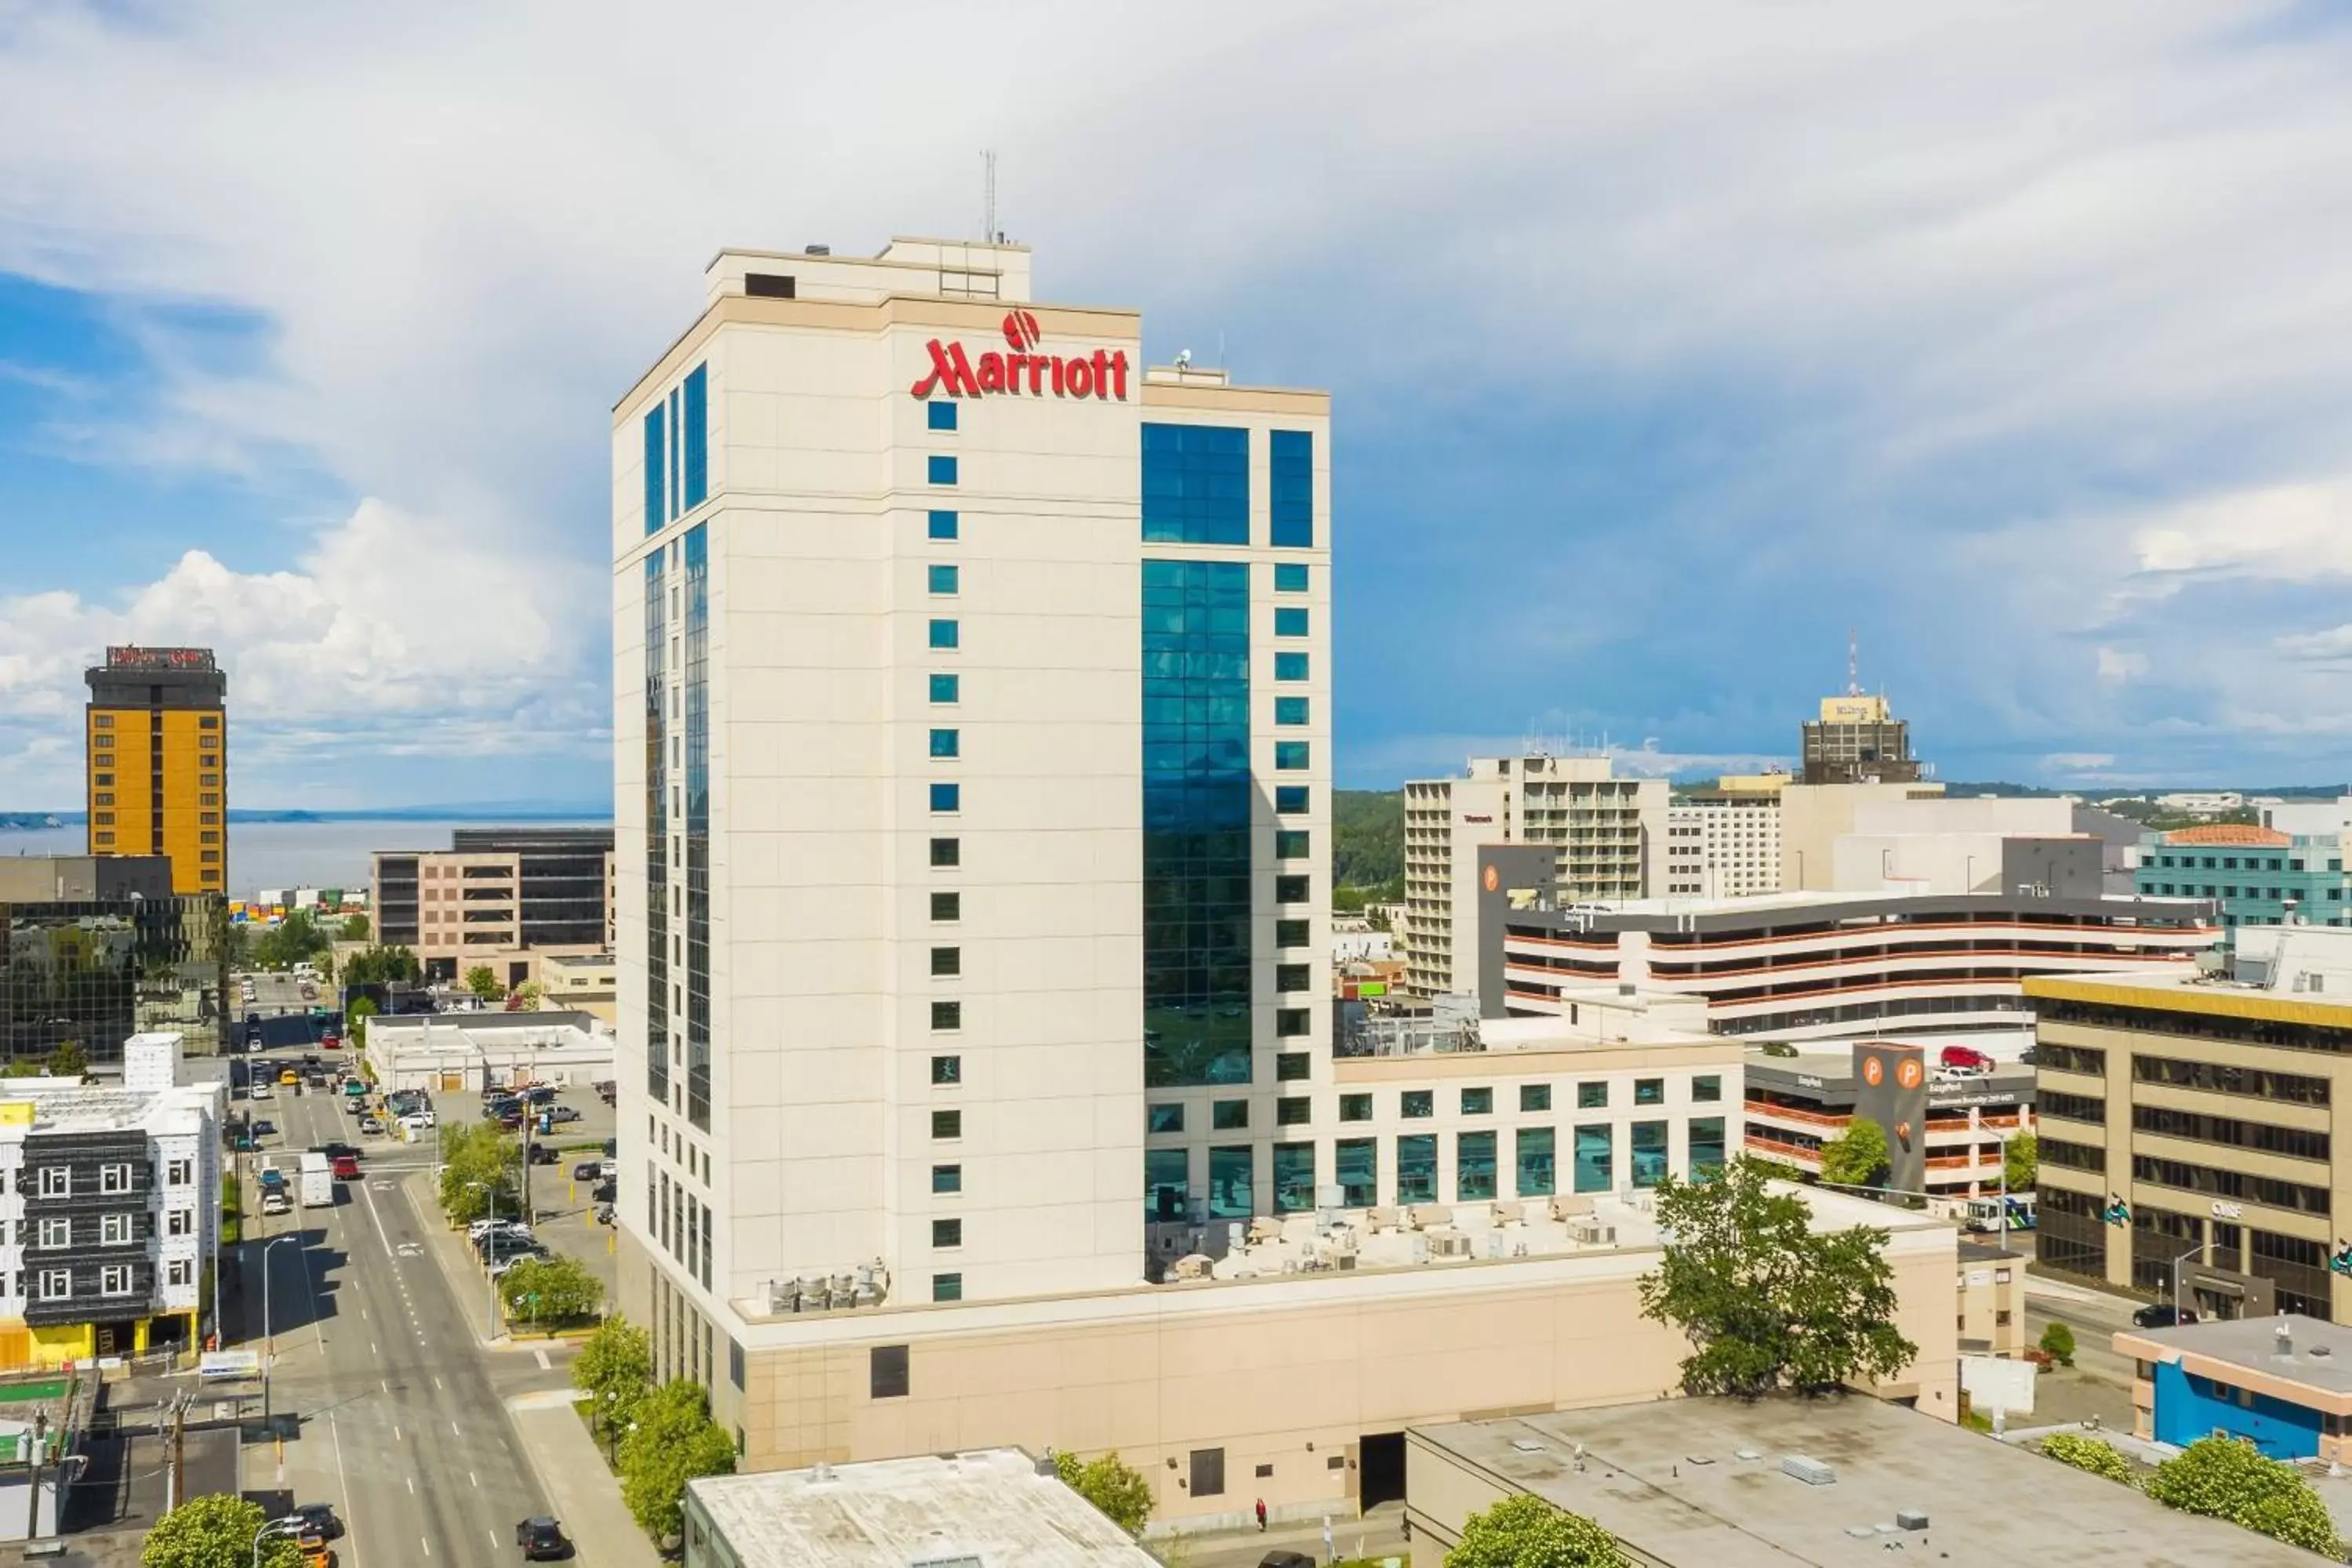 Property building in Marriott Anchorage Downtown